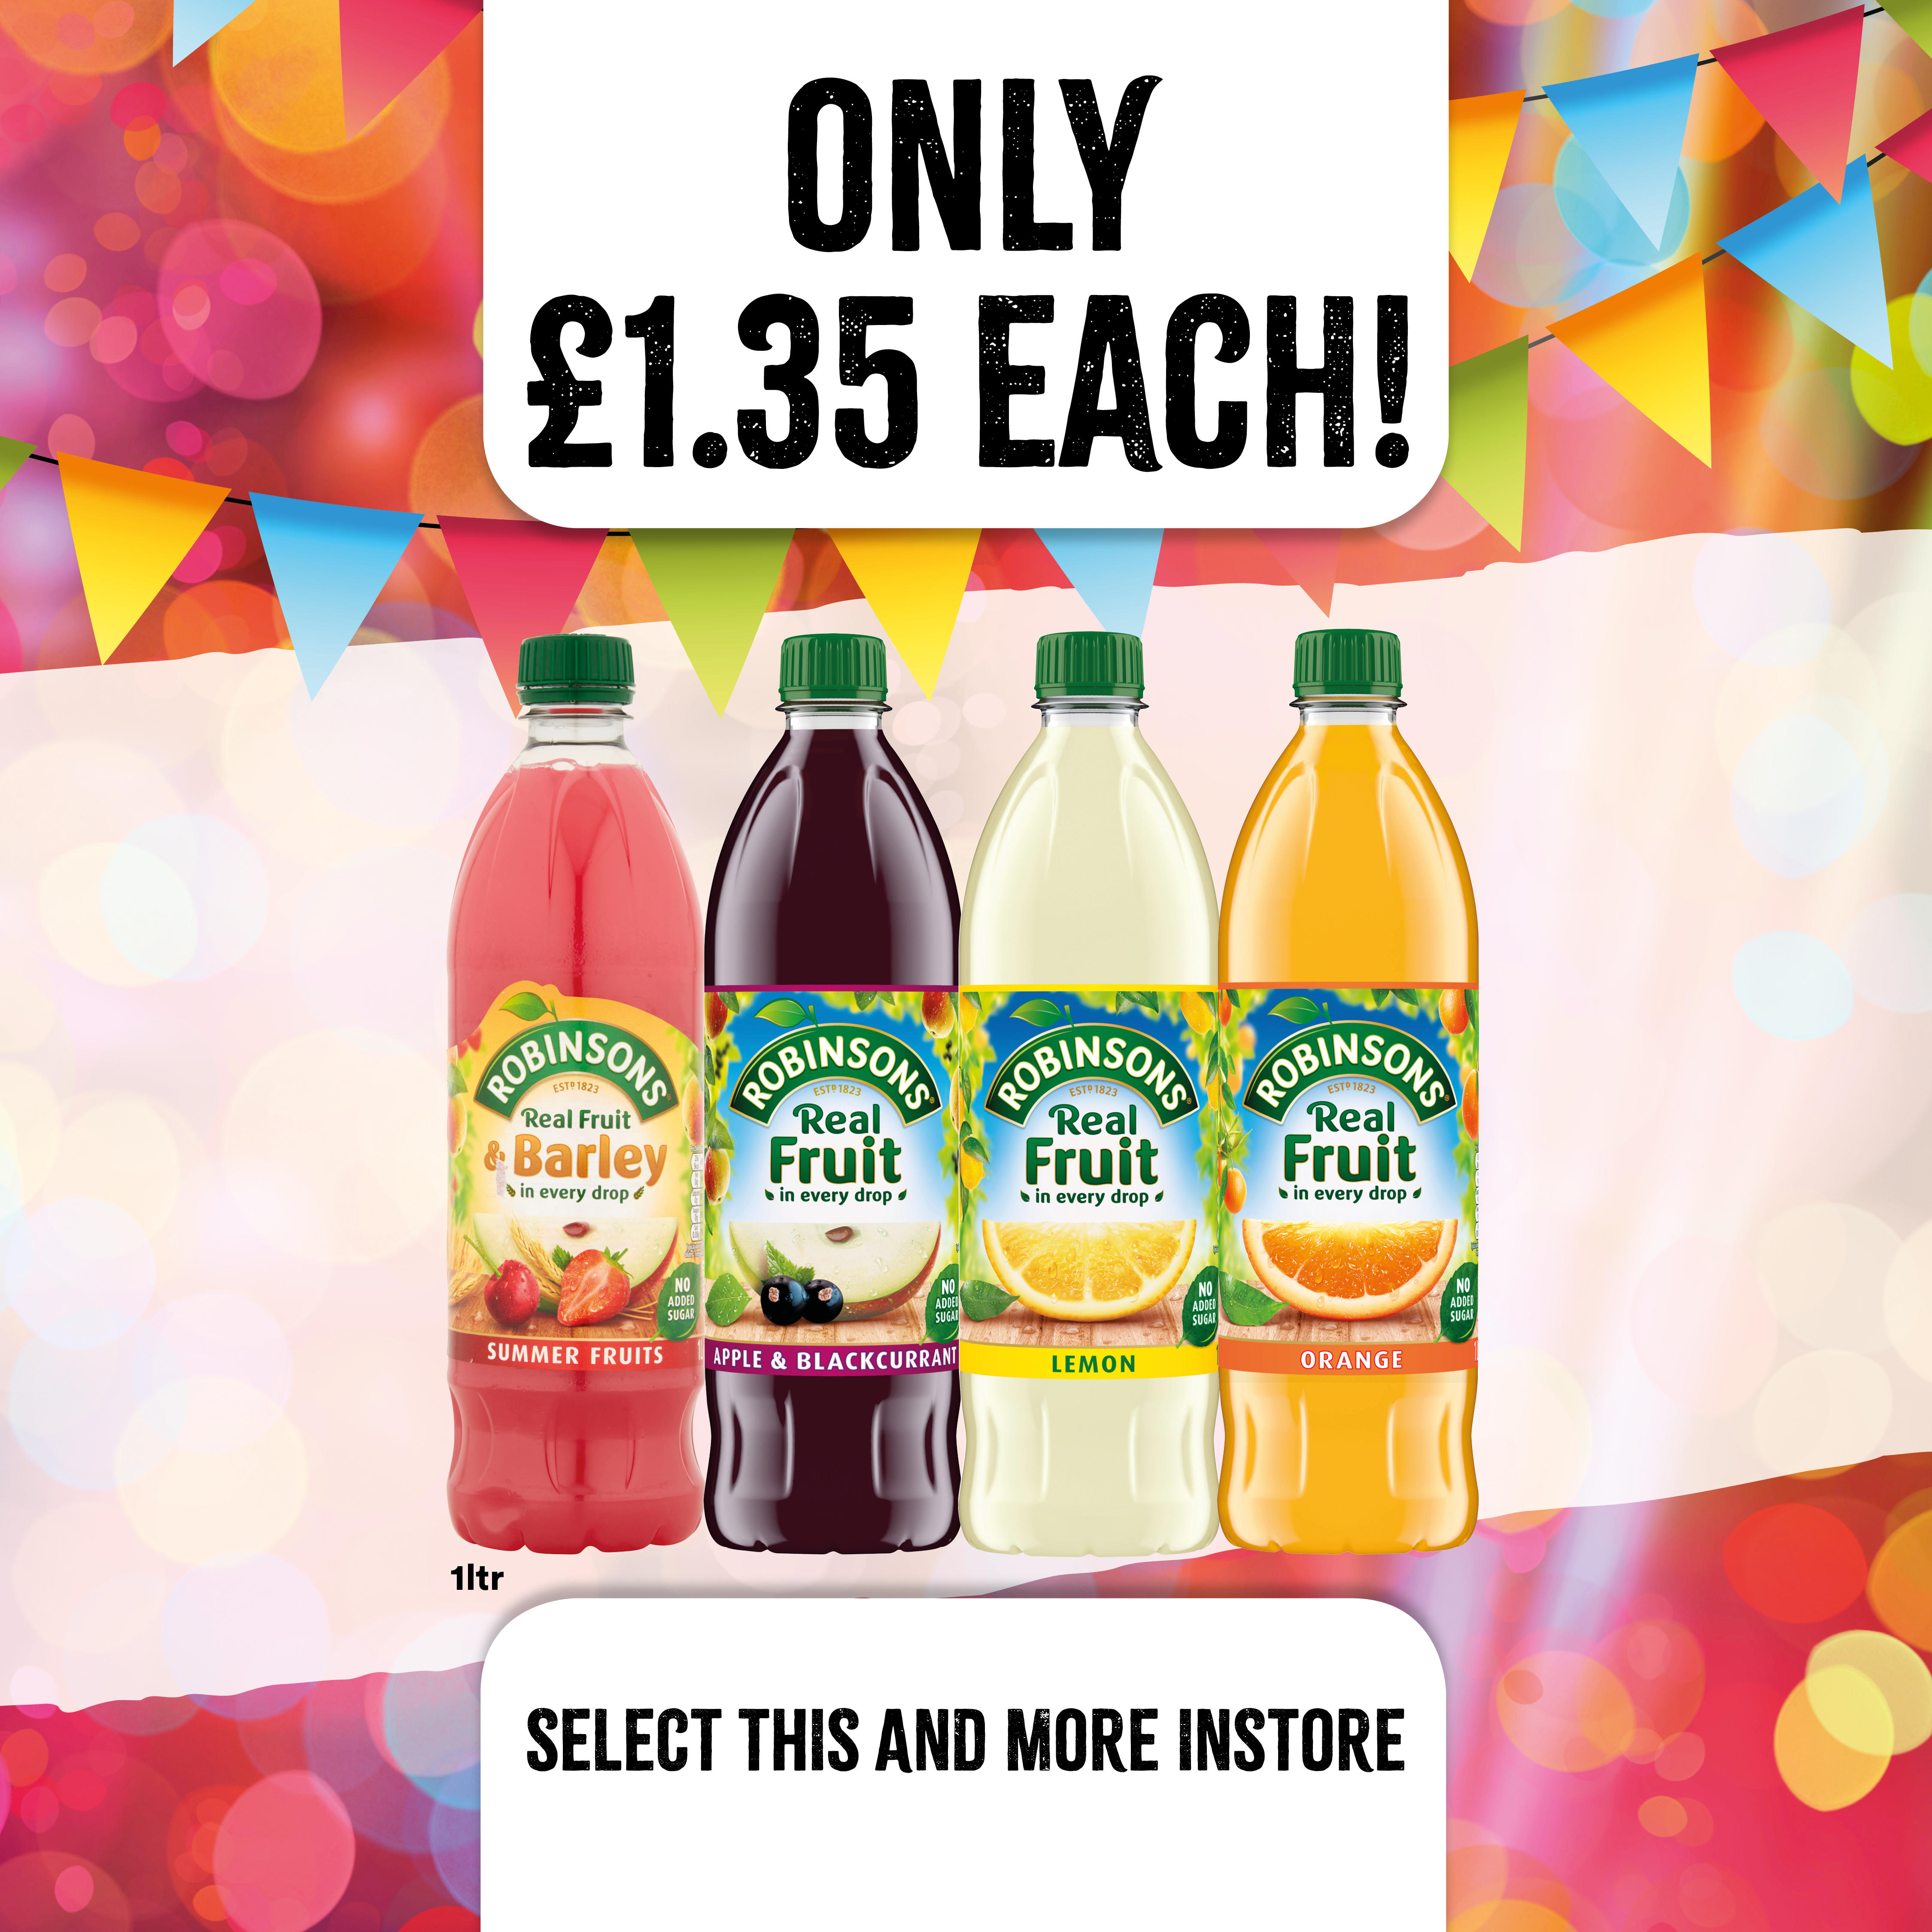 robinsons cordial only 1.35 at select convenience Bargain Booze Select Convenience Brentwood 01277 374893